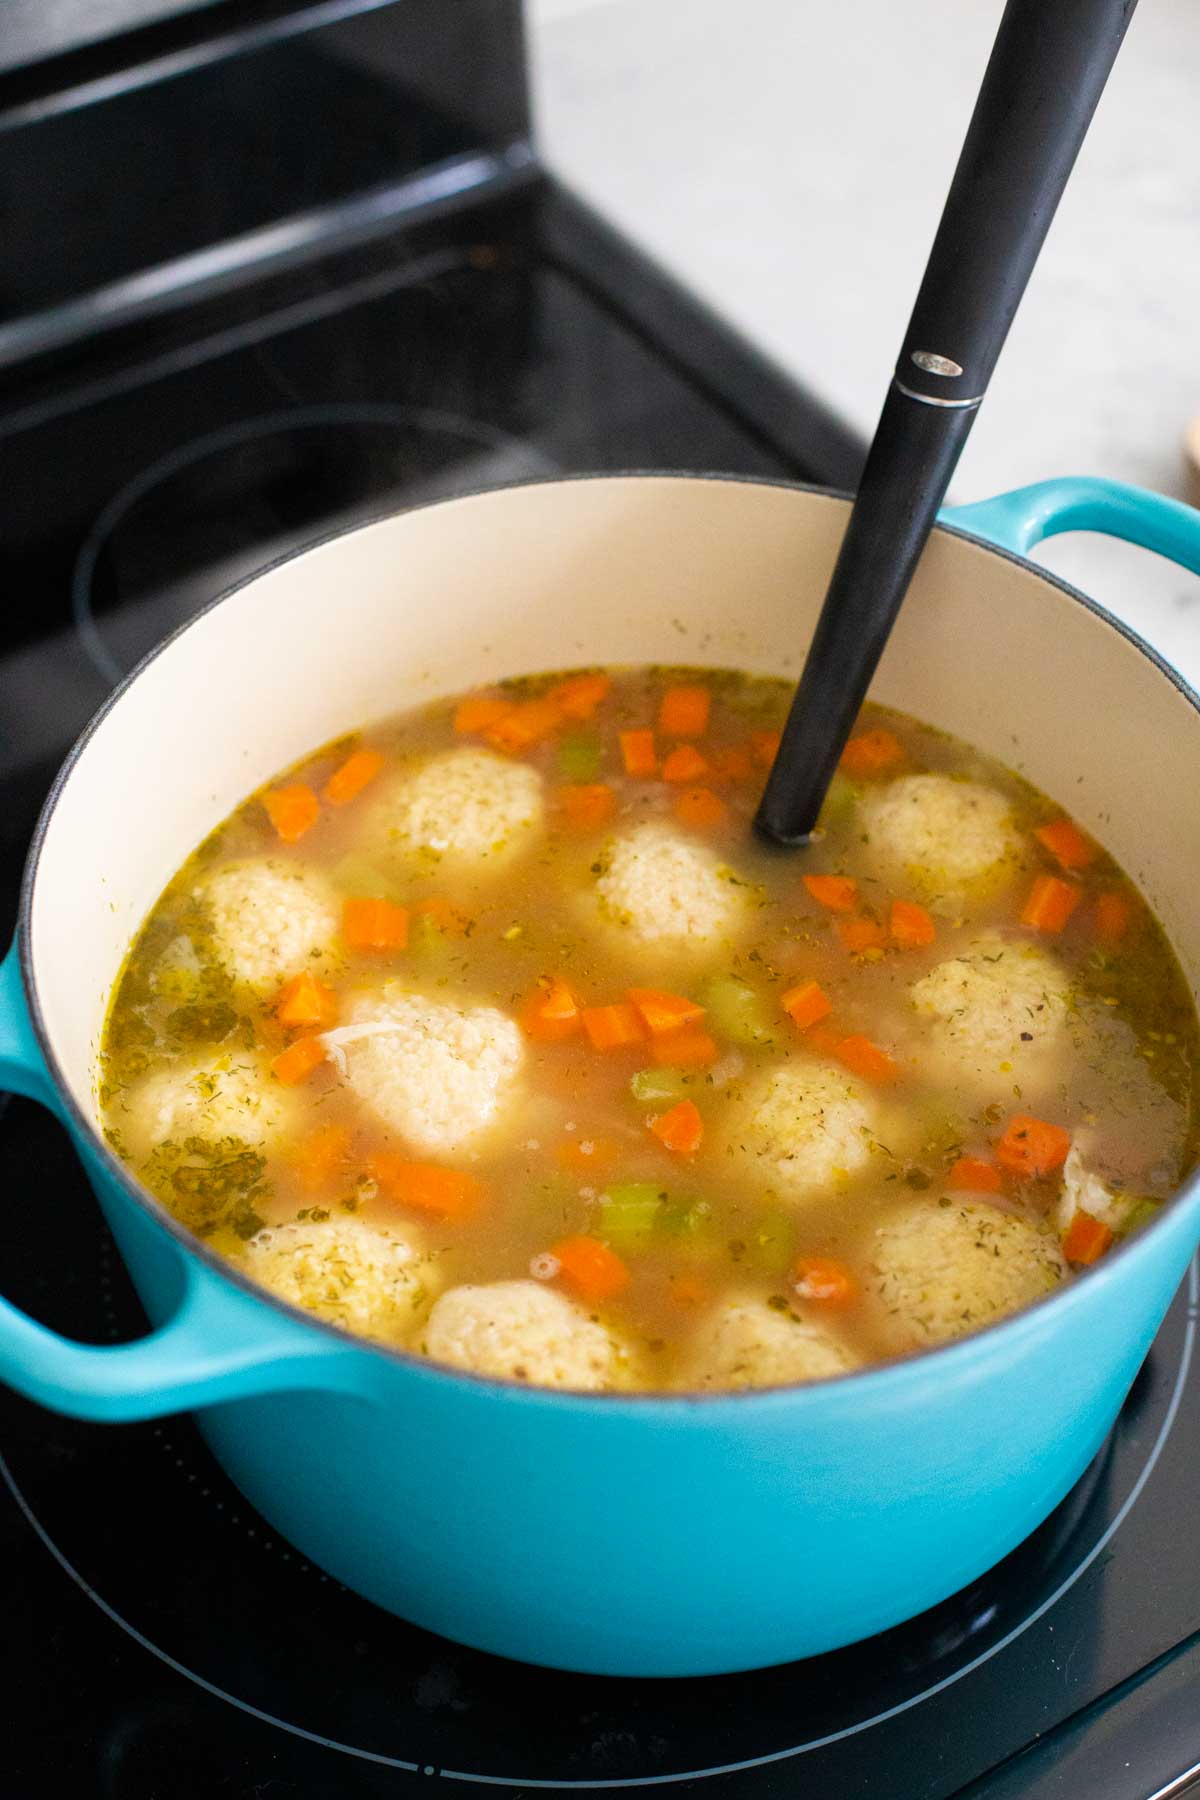 The finished matzoh ball soup has the chicken added last to just heat through.